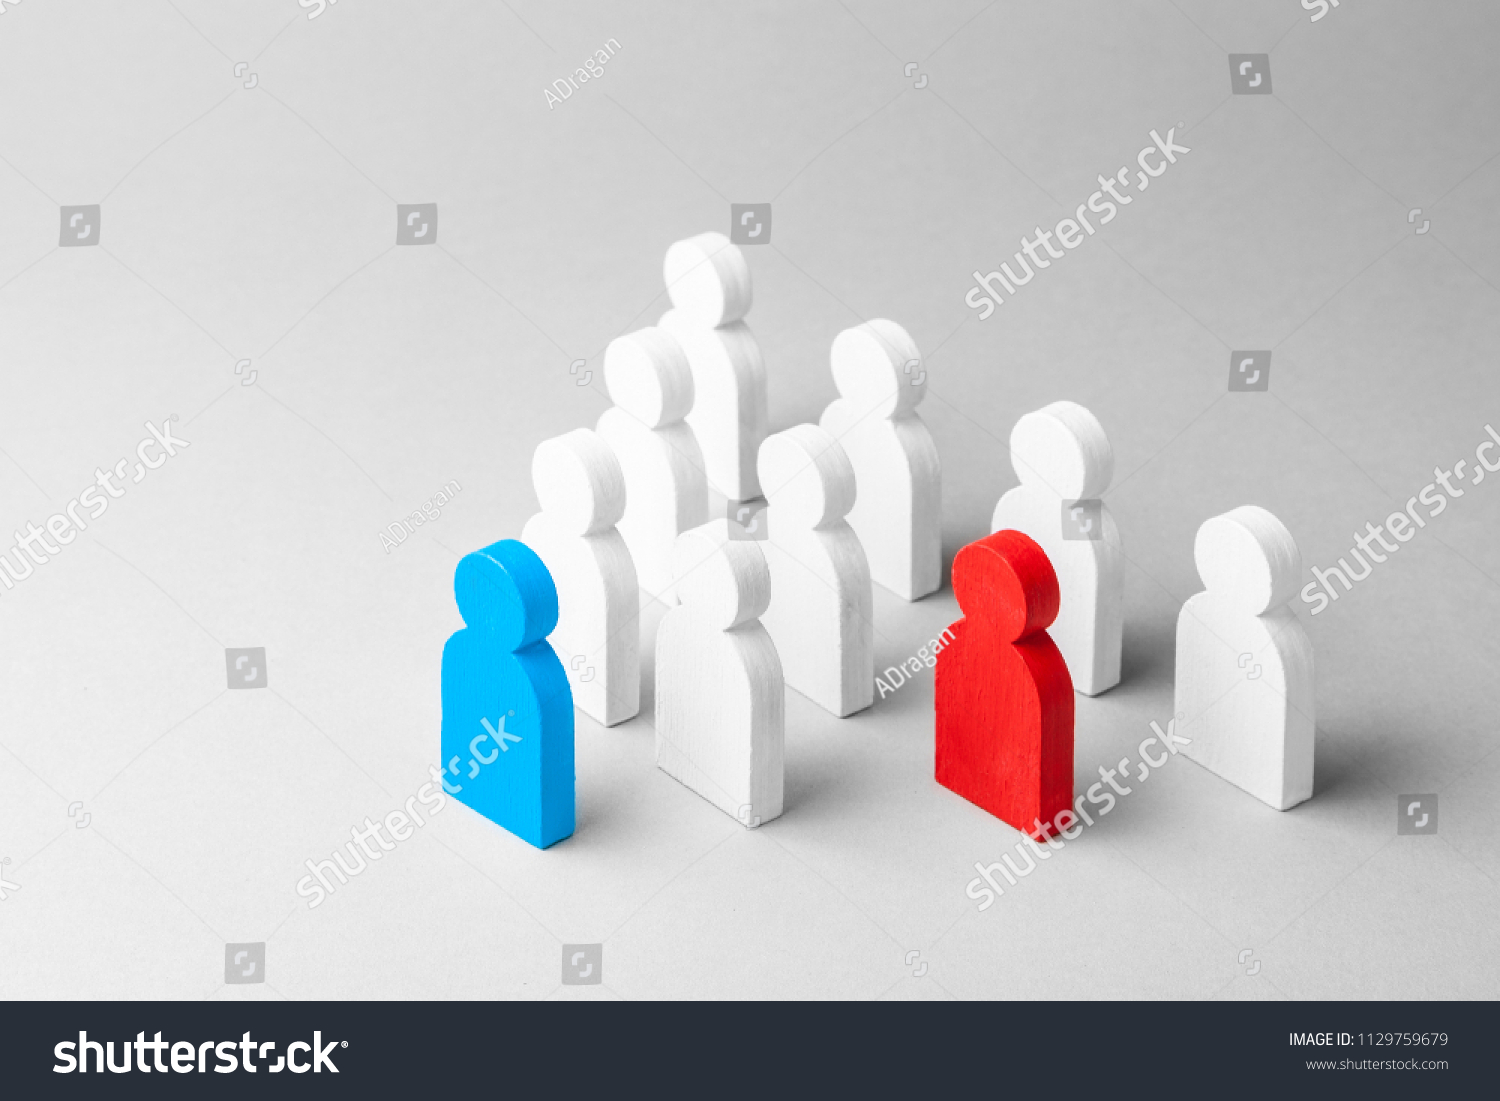 Concept leader of the business team indicates the direction of the movement towards the goal. Crowd of white men goes for the leader of the blue color and  bad conflicting employee of  red color #1129759679